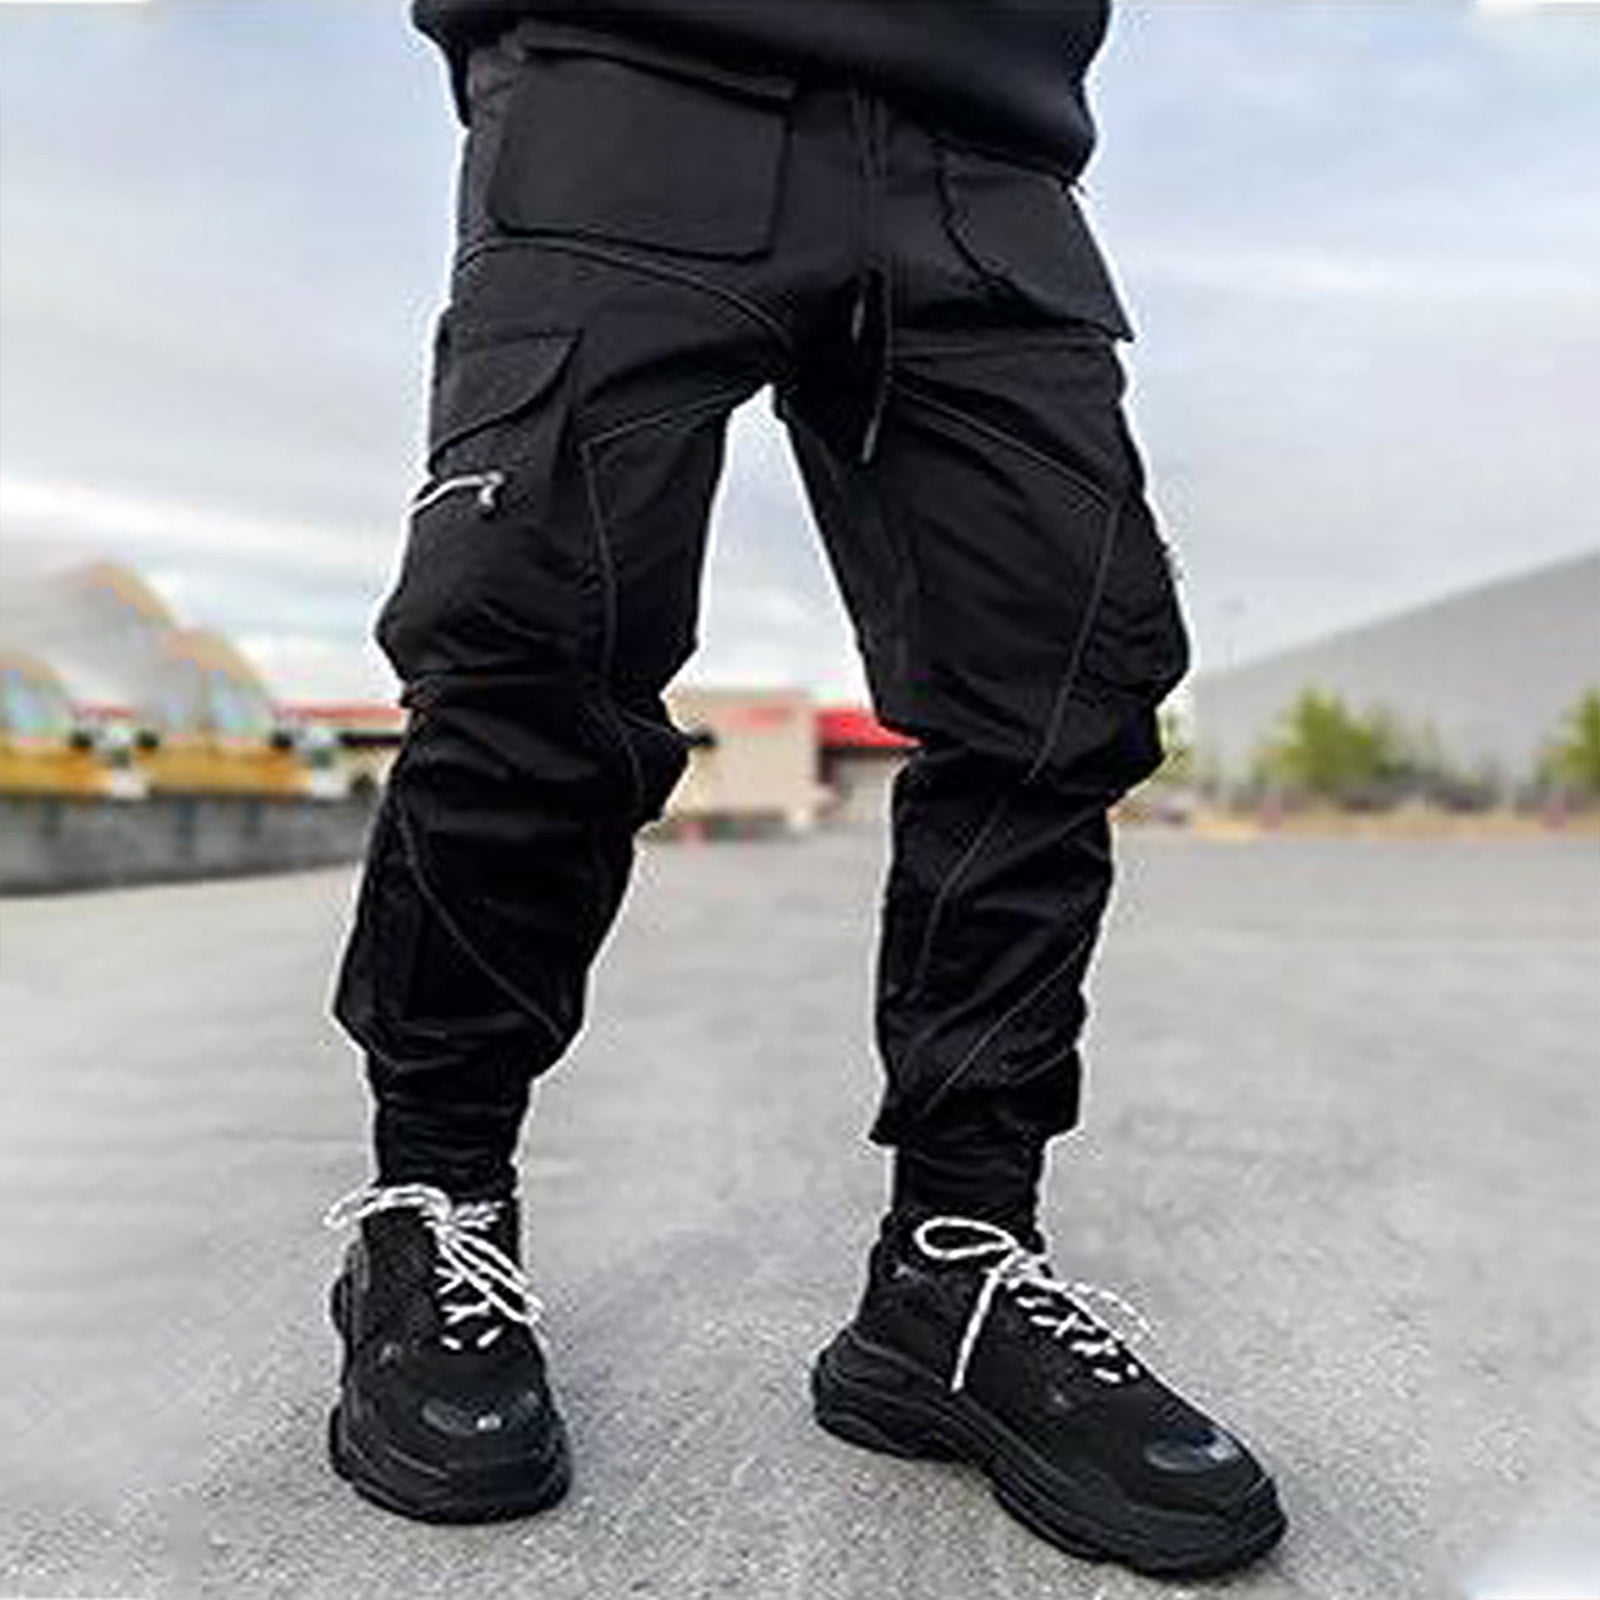 Straight Leg Pocket Solid Cargo Shorts Straight Leg, Men's Cotton Loose Zip Fishing Running Summer Mens Clothing Casual Pants For Outdoor